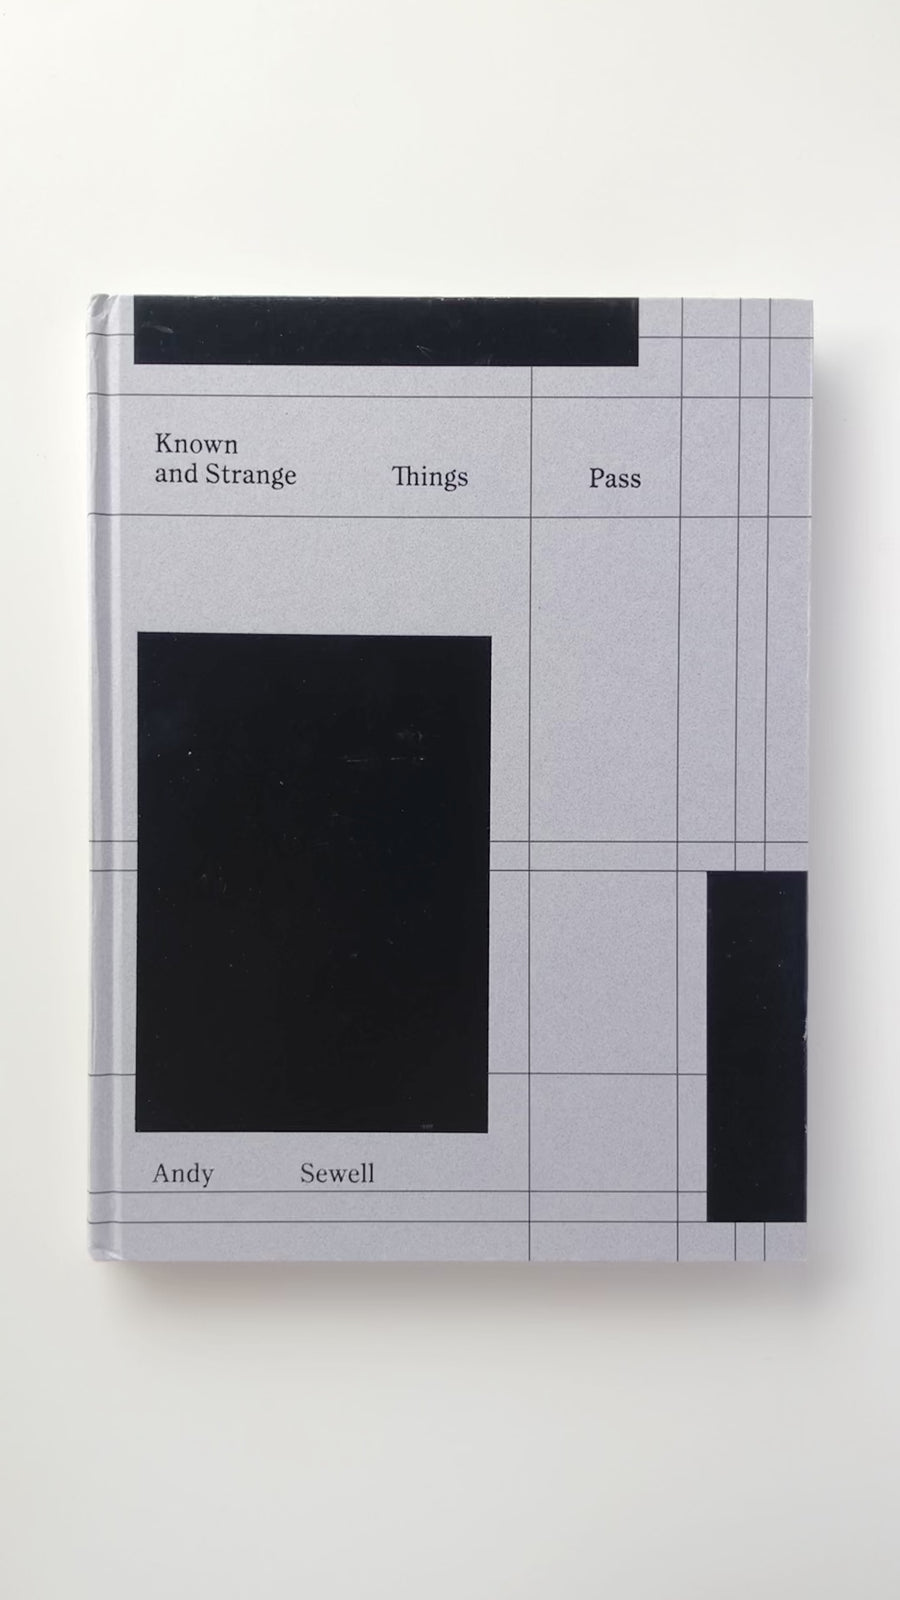 <tc>Known and Strange Things Pass by Andy Sewell</tc>